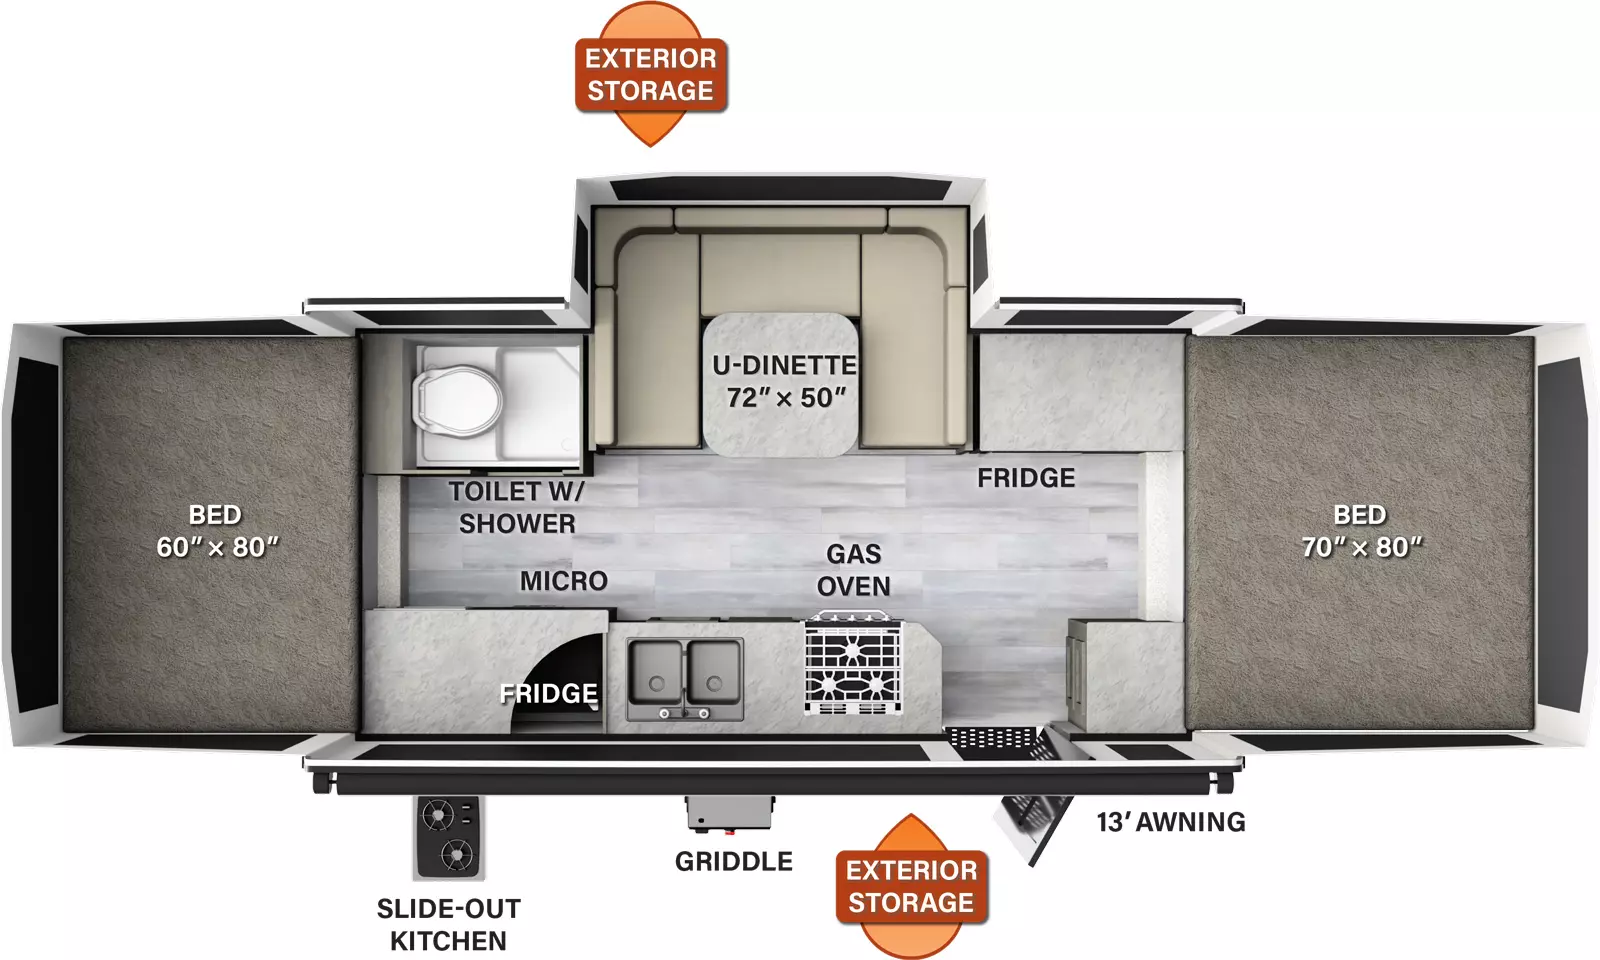 The HW277 has one slide out on the off-door side and one entry door. Exterior features include a 13 foot awning, griddle, slideout kitchen with refrigerator and exterior storage on both sides. Interior layout from front to back: front tent bed; off-door side cabinet with refrigerator, u-dinette slideout, and toilet w/shower; door side cabinet, entry, gas oven, sink, and cabinet with microwave; tent bed in the rear. 